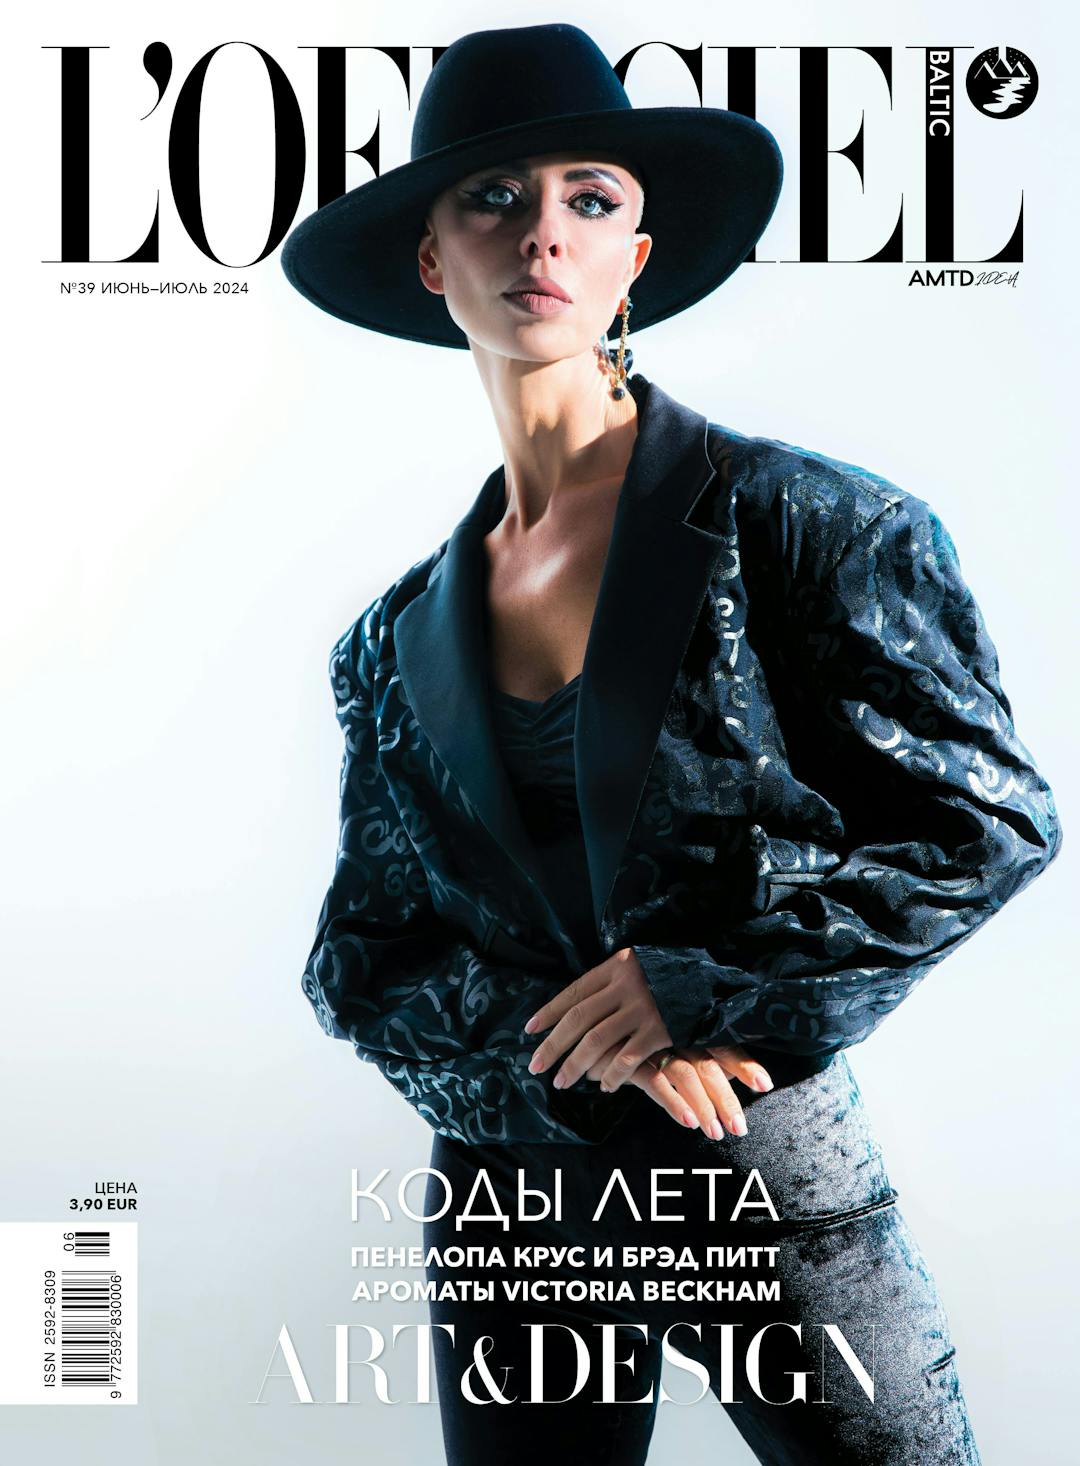 L’OFFICIEL BALTIC #39 Cover in Lithuania